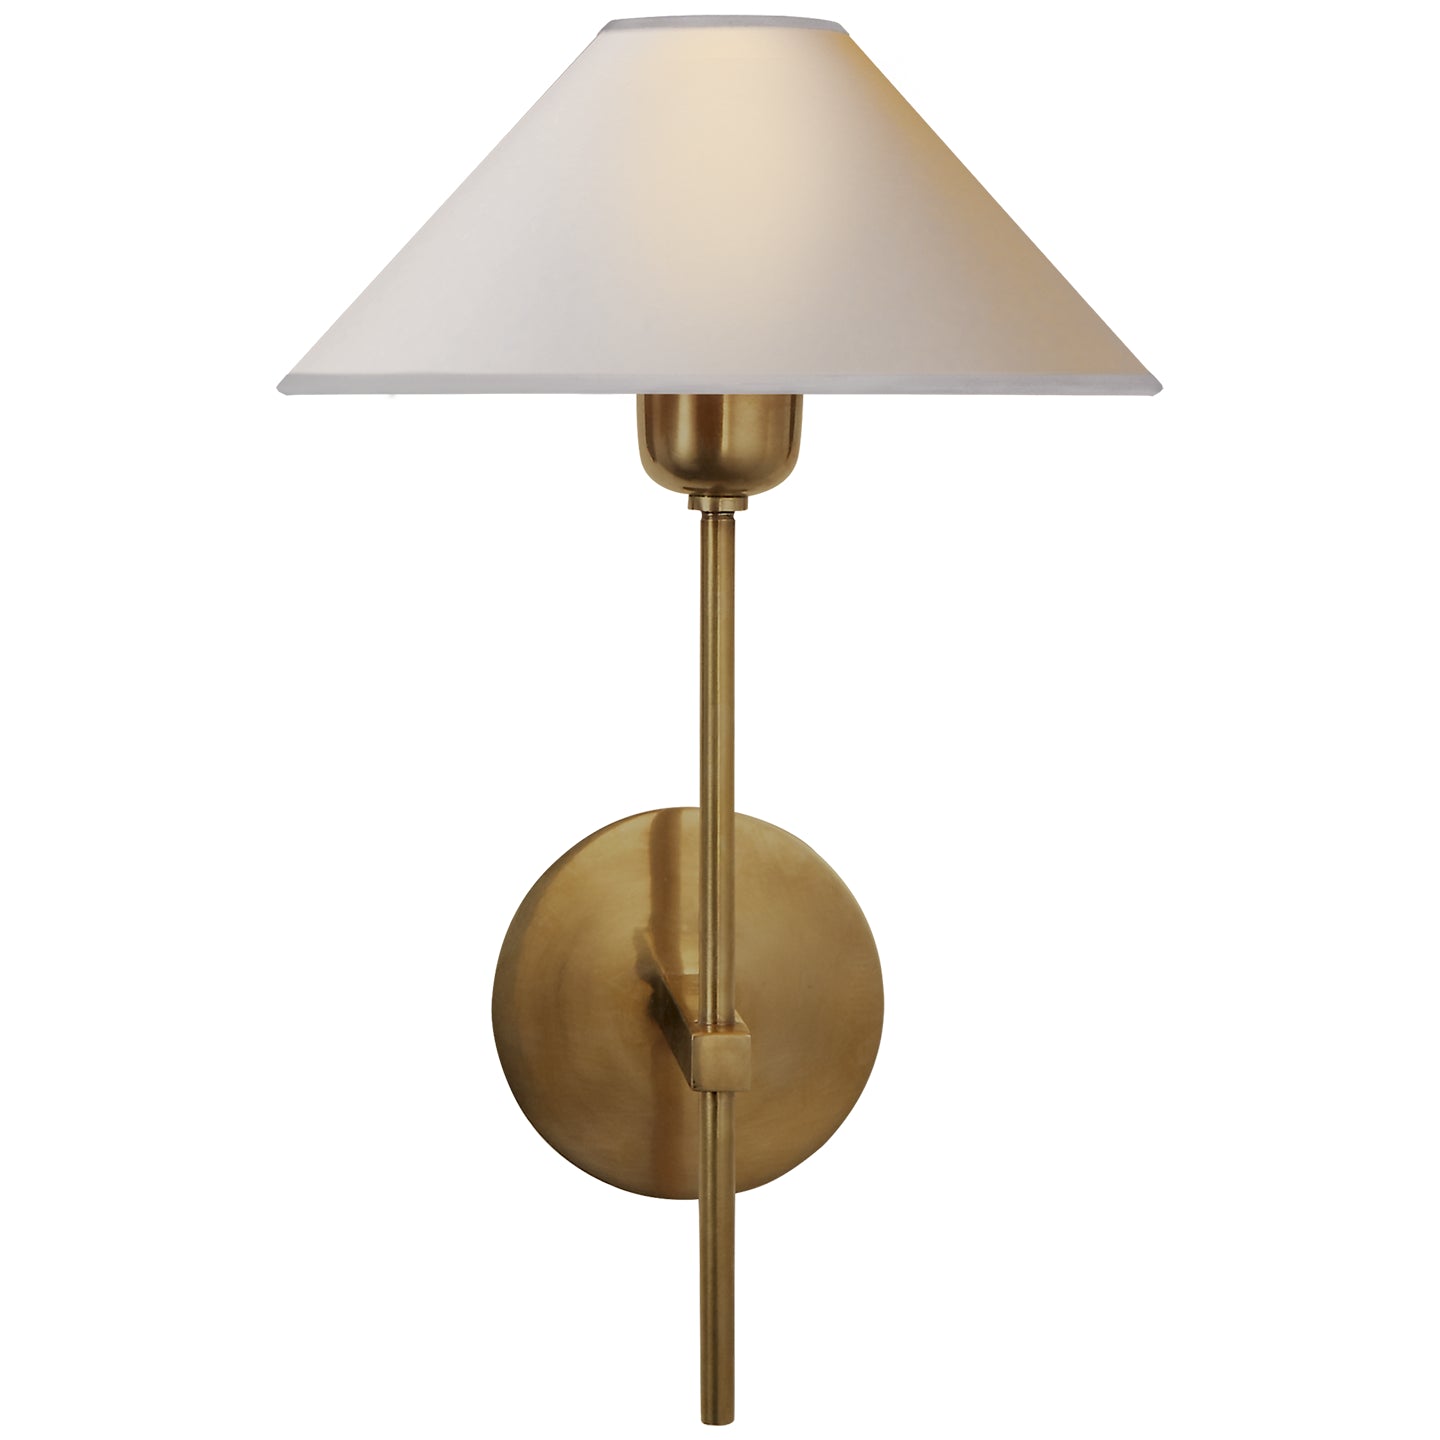 One Light Wall Sconce from the Hackney collection in Hand-Rubbed Antique Brass finish